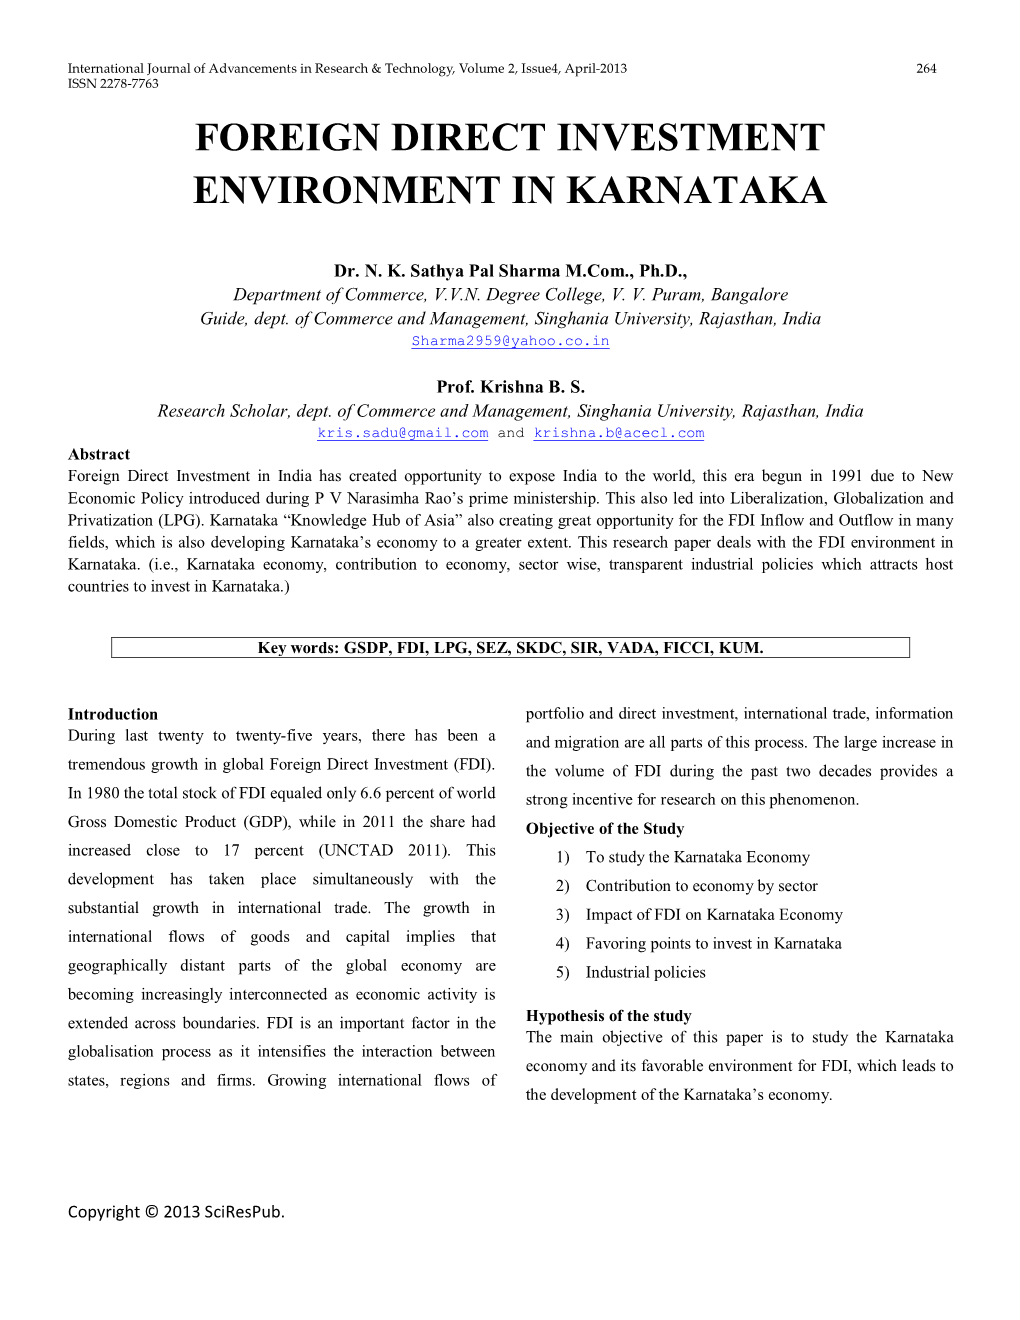 Foreign Direct Investment Environment in Karnataka